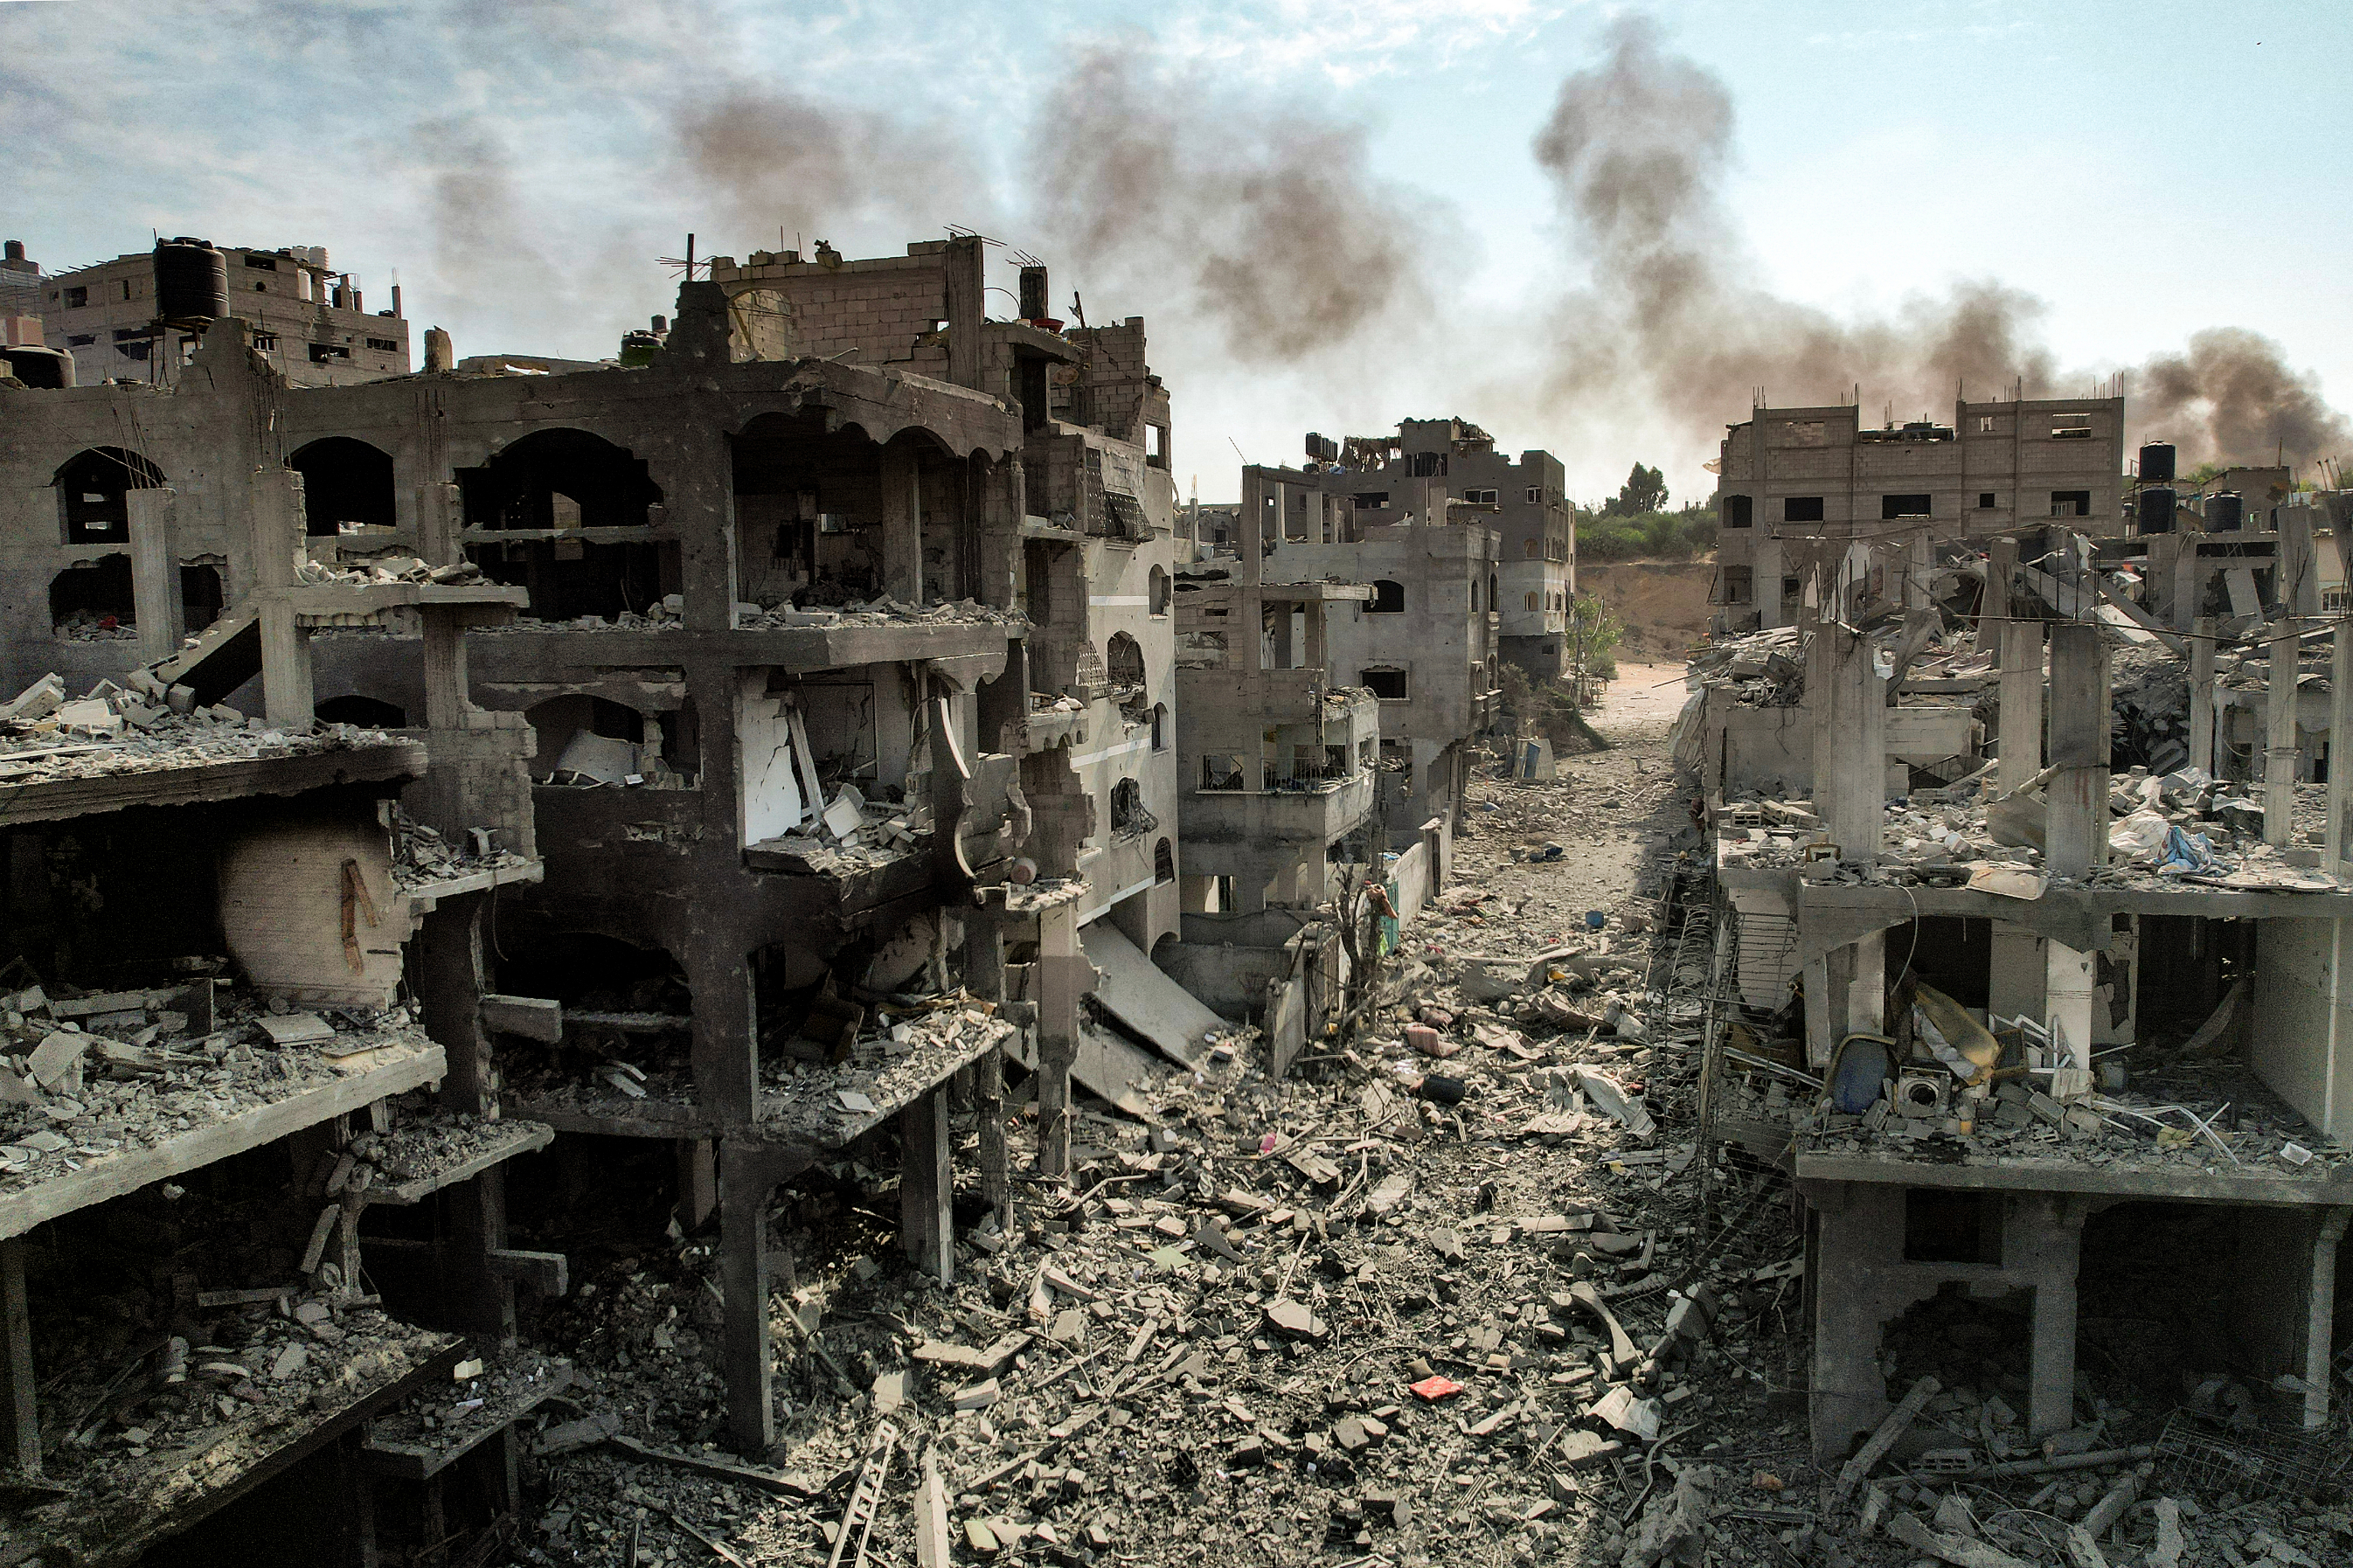 Destroyed buildings in a devastated area, rubble scattered on the ground